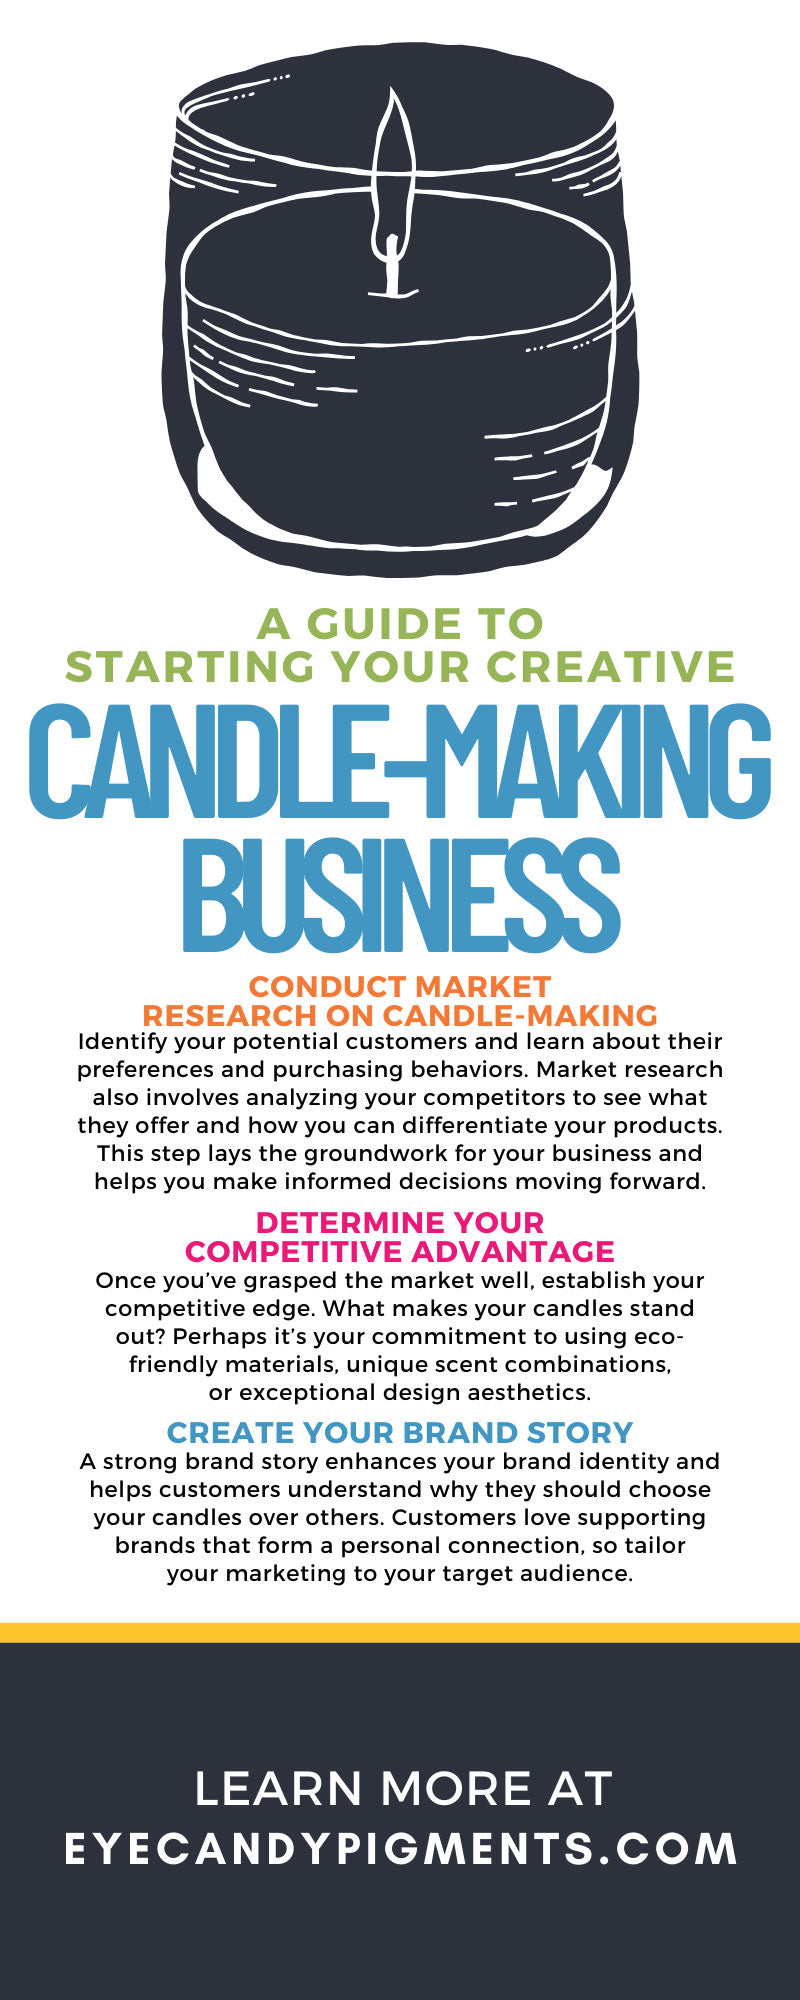 A Guide to Starting Your Creative Candle-Making Business